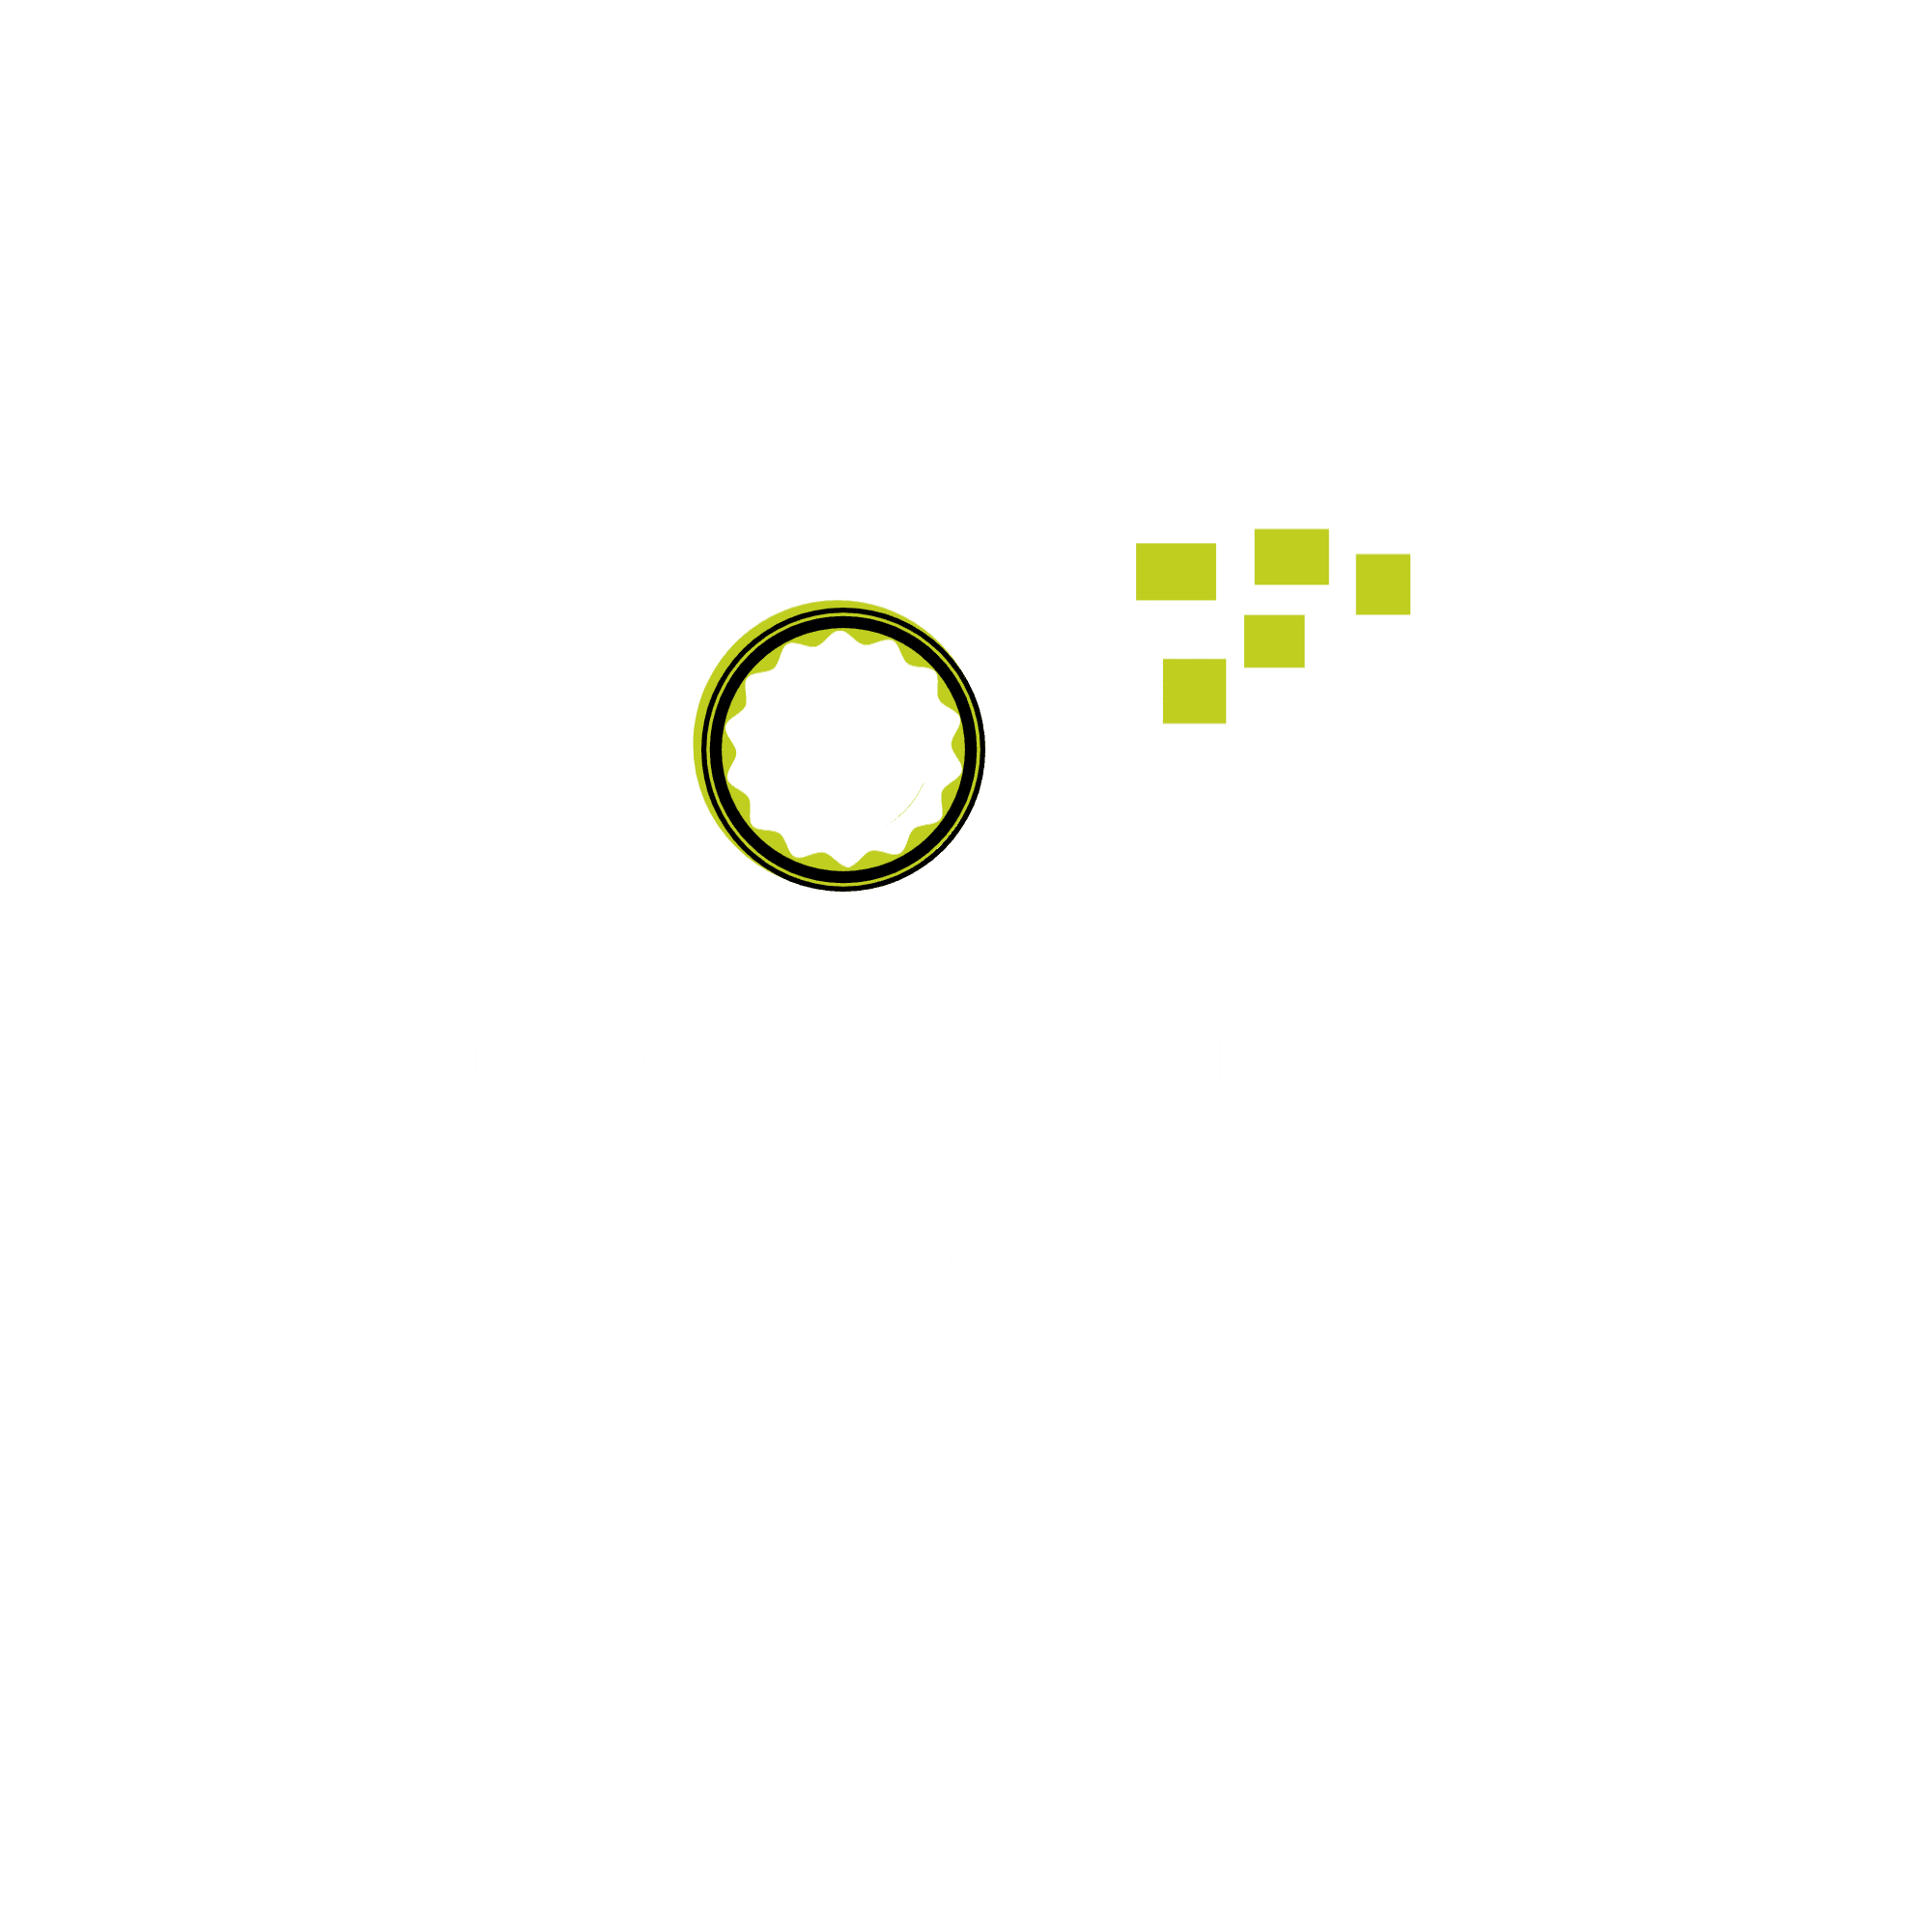 DK's Photography